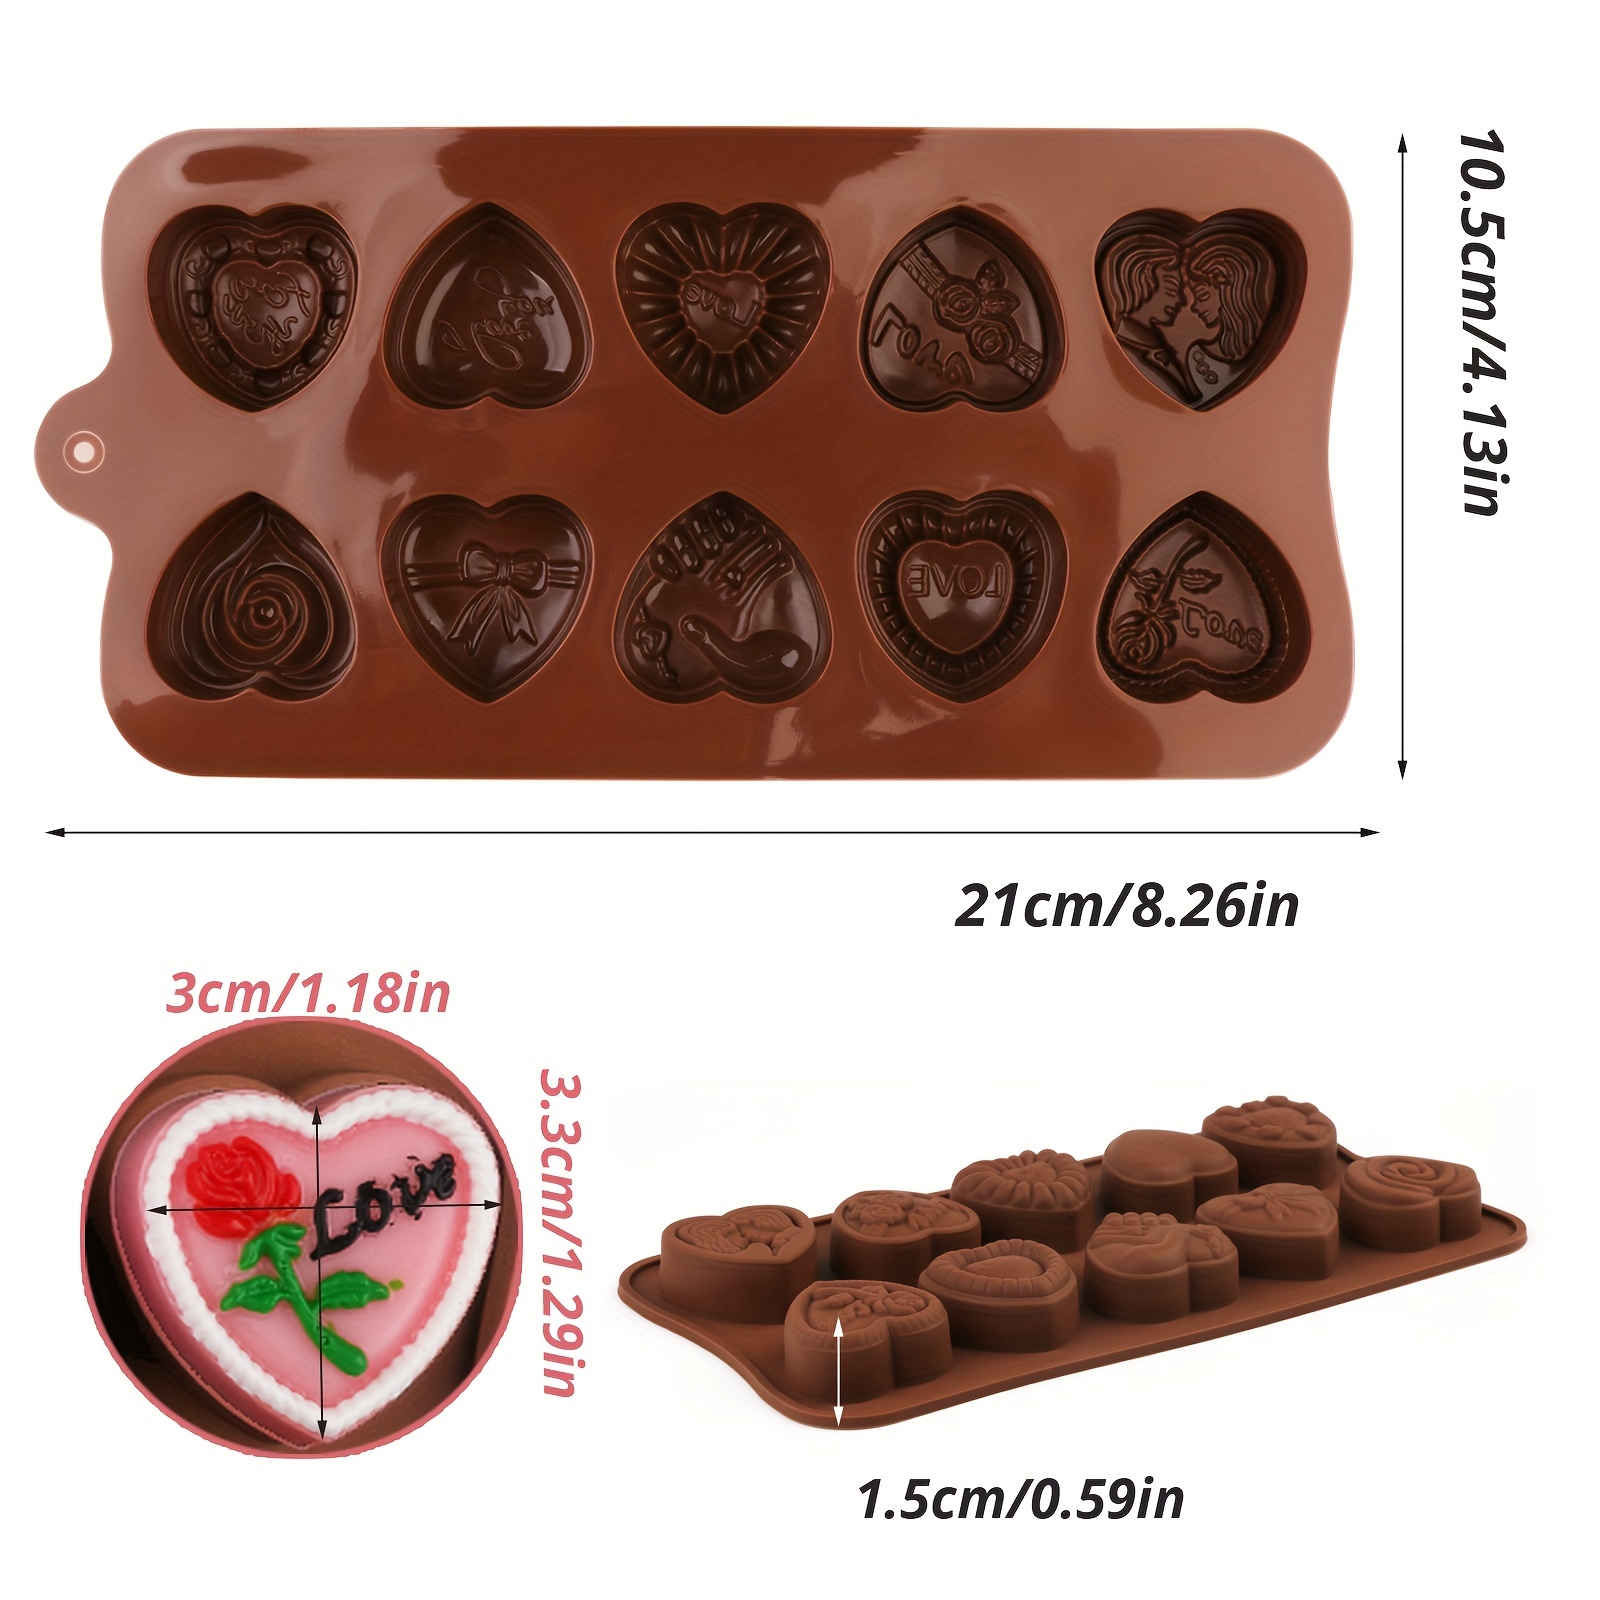  sofliym Heart Silicone Molds for Gummy, Candy, Chocolate, Small  Homemade Treats Molds with Scraper (1 PCS heart) : Home & Kitchen